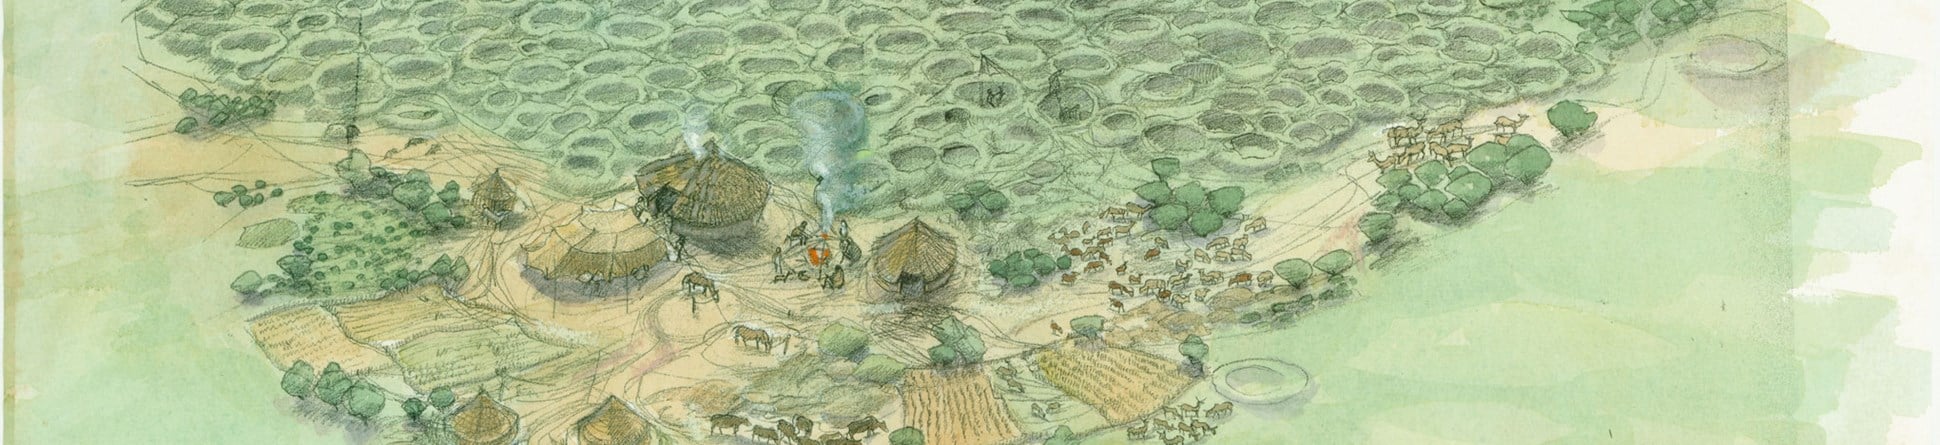 Artists reconstruction of a flint mining landscape with a concentration of mining pits and thatched huts in the foreground.